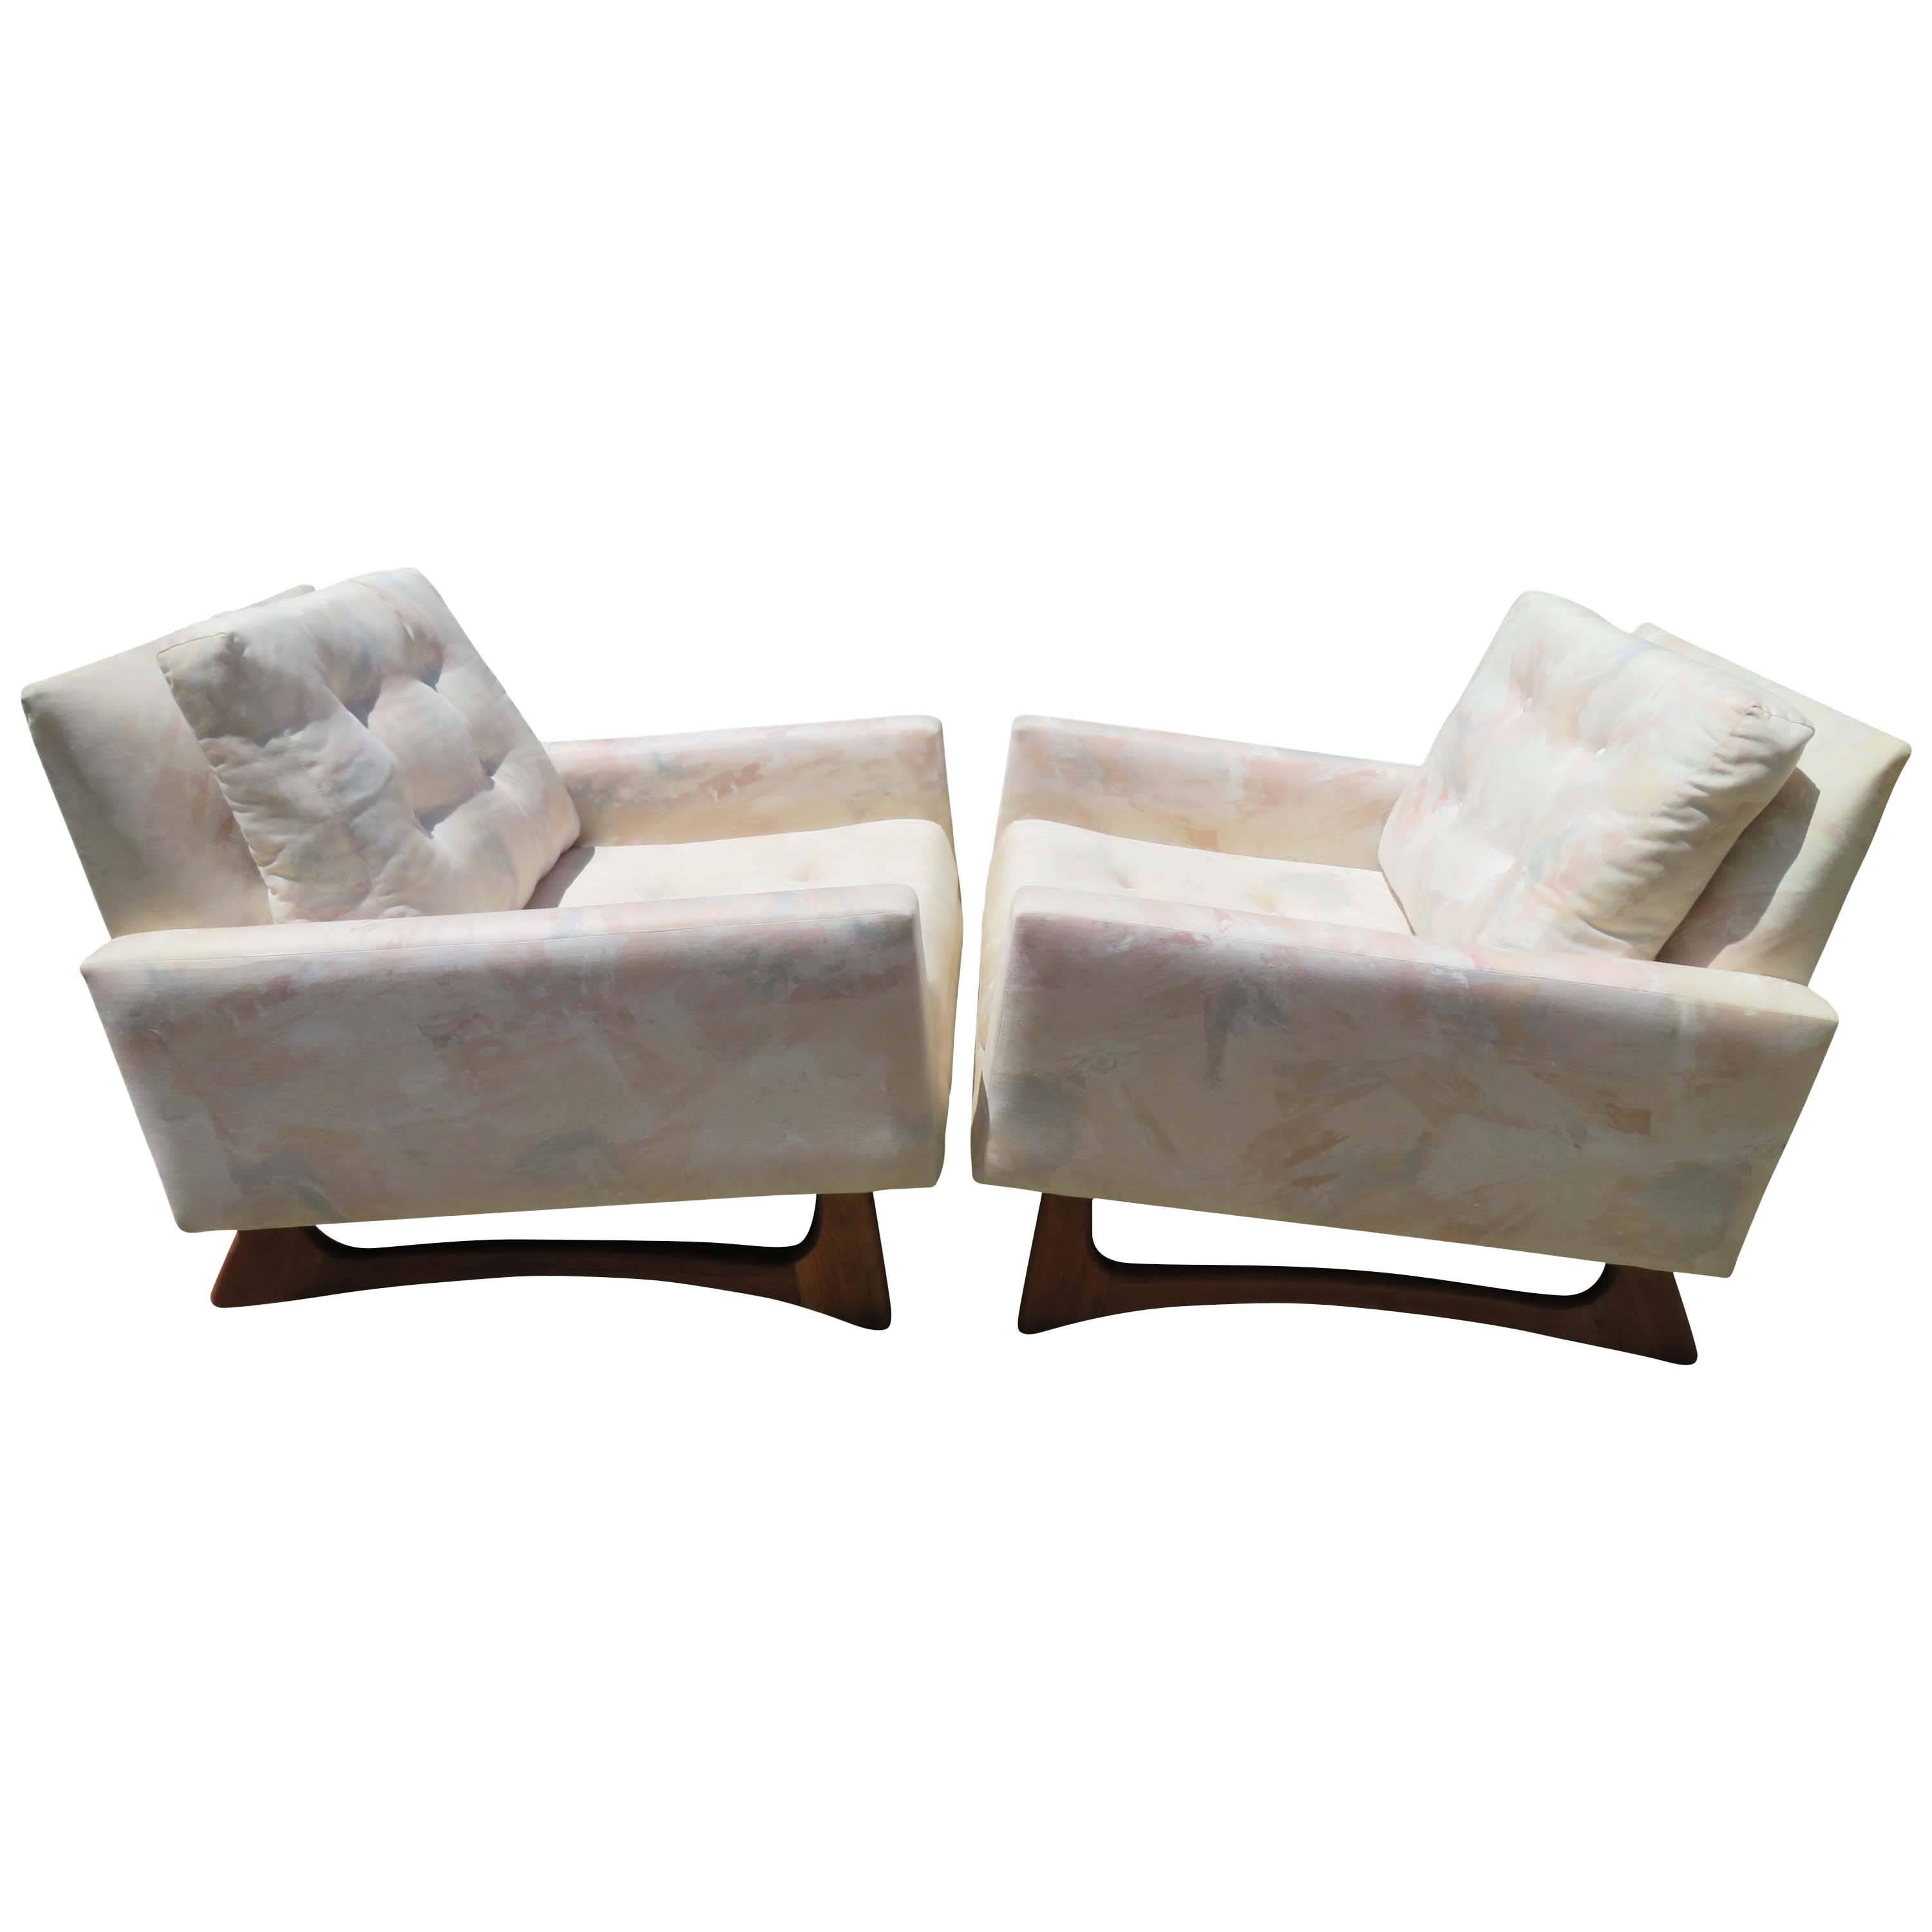 Handsome Pair of Adrian Pearsall Lounge Chairs for Craft Associates Inc.